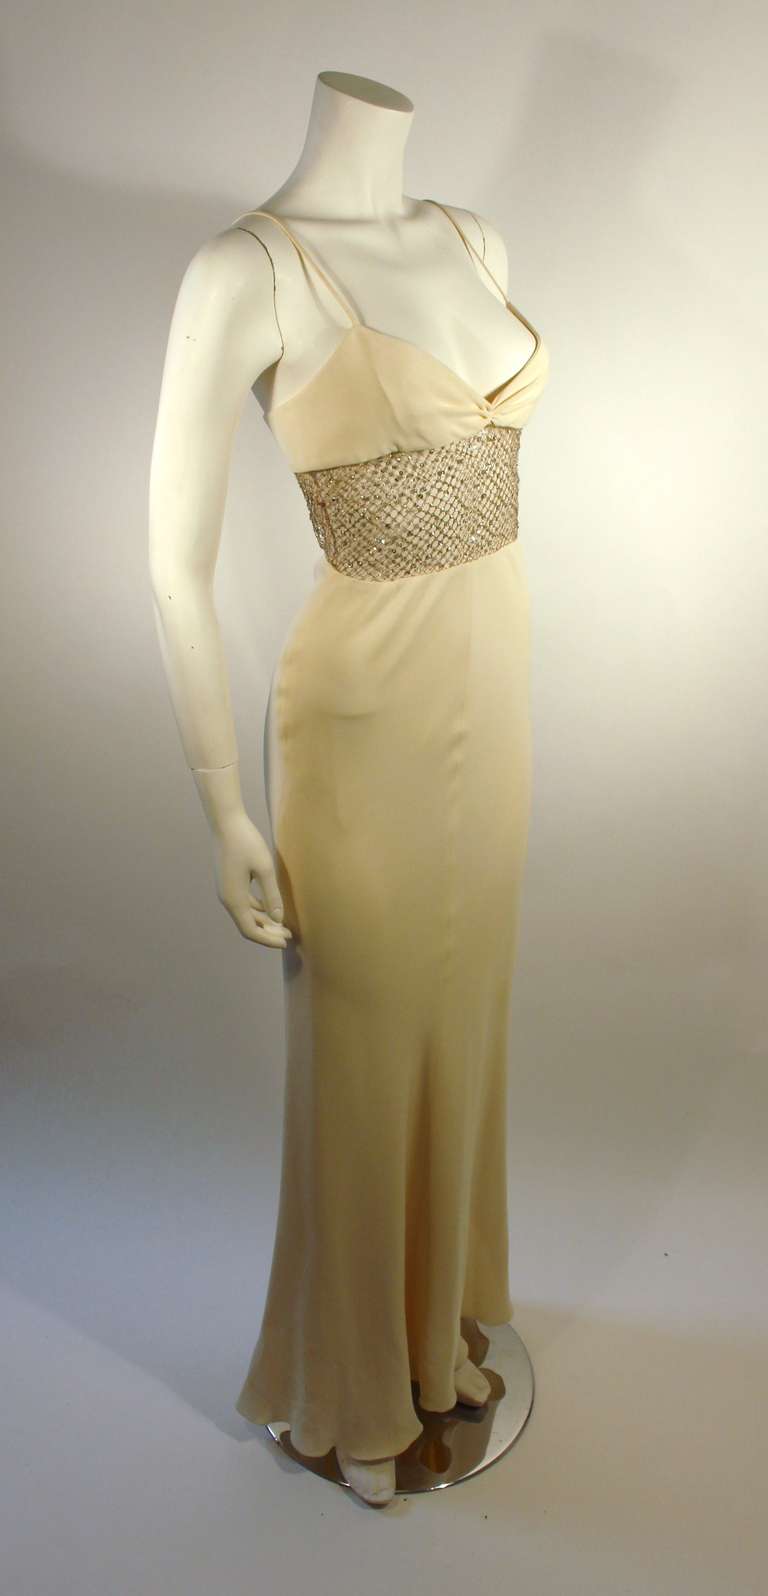 This is an amazing cream gown by Valentino. The gown features mesh and rhinestone detailing at the waist, beautiful ruched detailing at the bust, and spaghetti straps. 

Marked size 8
Measurements (Approximate):
Length (back to hem): 55